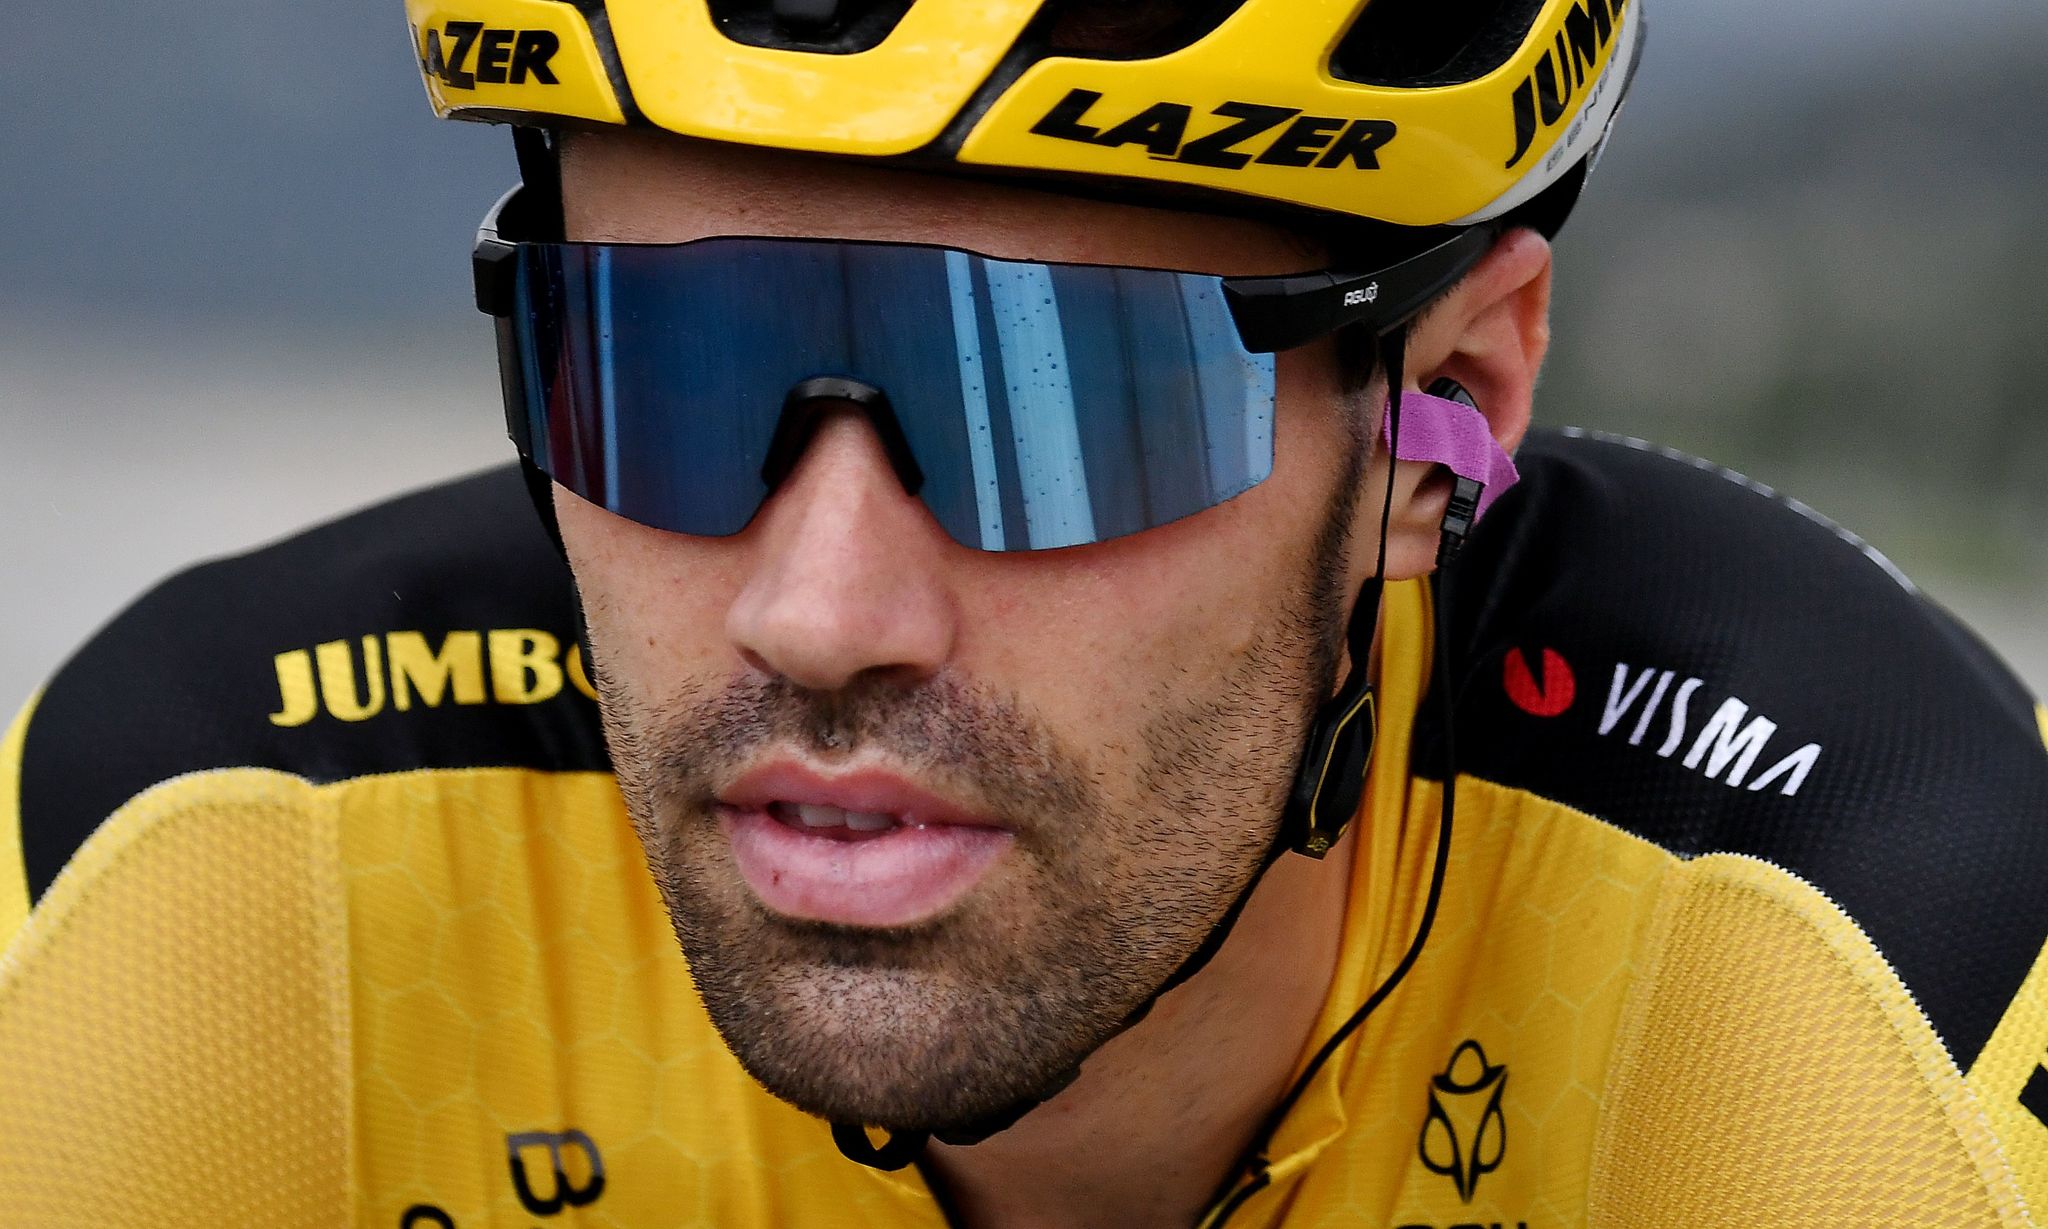 Team Jumbo rider Netherlands' Tom lt;HIT gt;Dumoulin lt;/HIT gt; compete during the 1st stage of the 107th edition of the Tour de France cycling race, 156 km between Nice and Nice, on August 29, 2020. (Photo by Marco Bertorello / AFP)